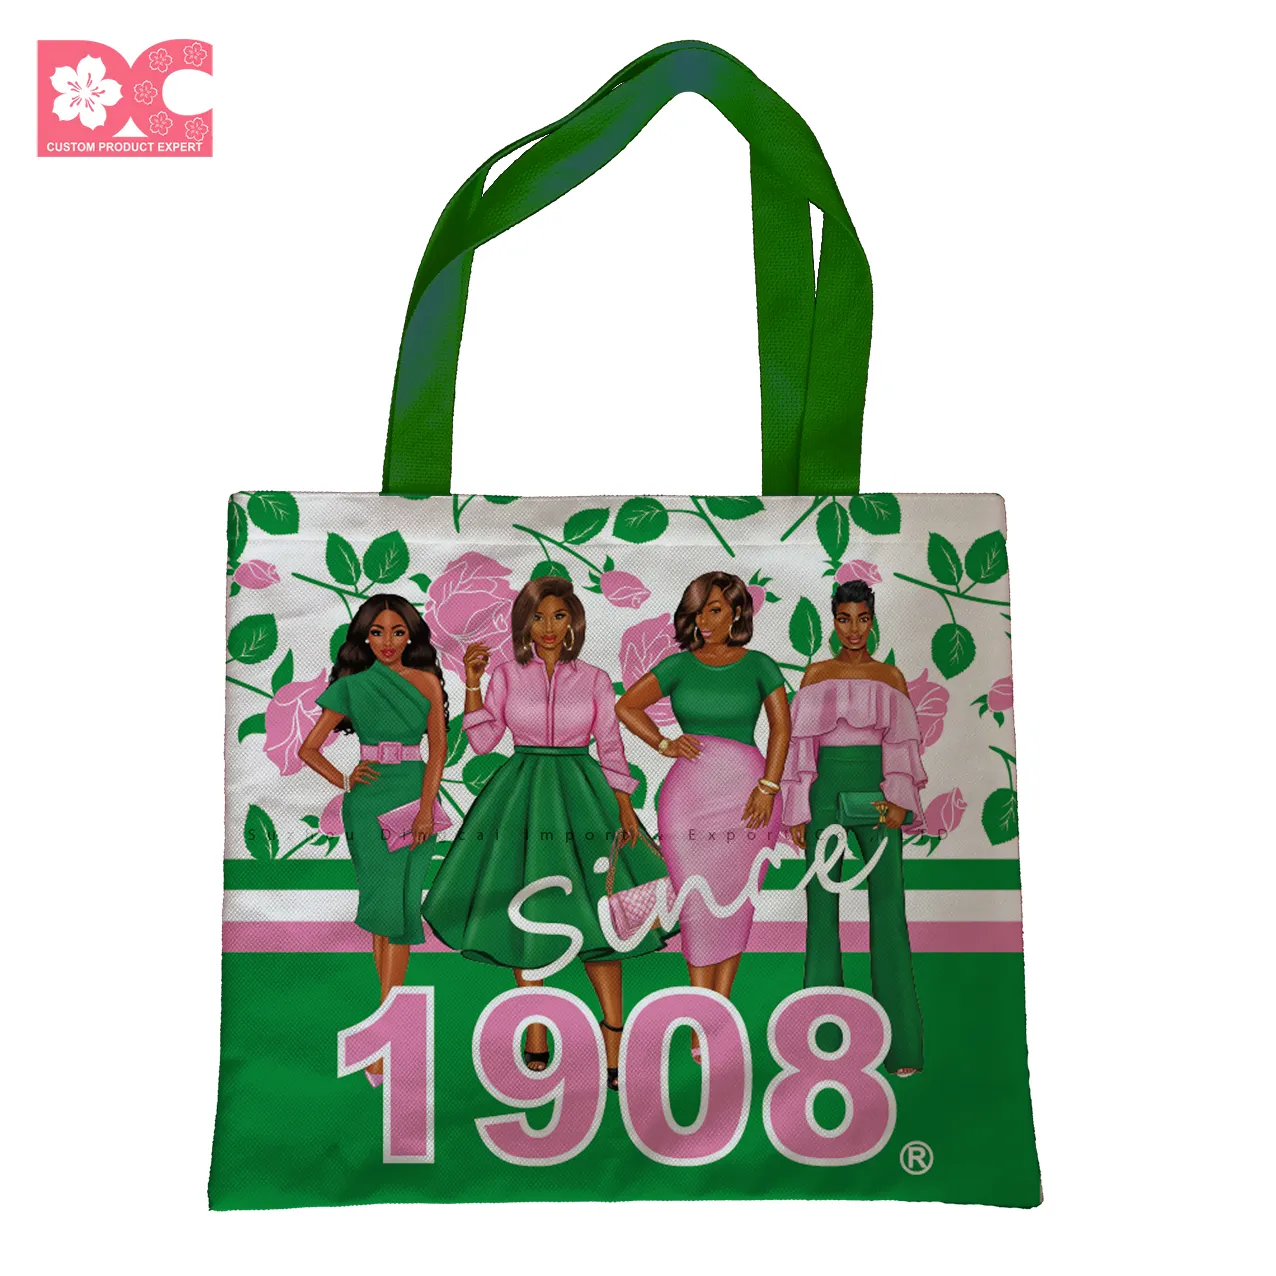 High quality Double Side Sublimation Printing 16"x14" Heavy Material Pink and Green Greek Letters Tote Bag